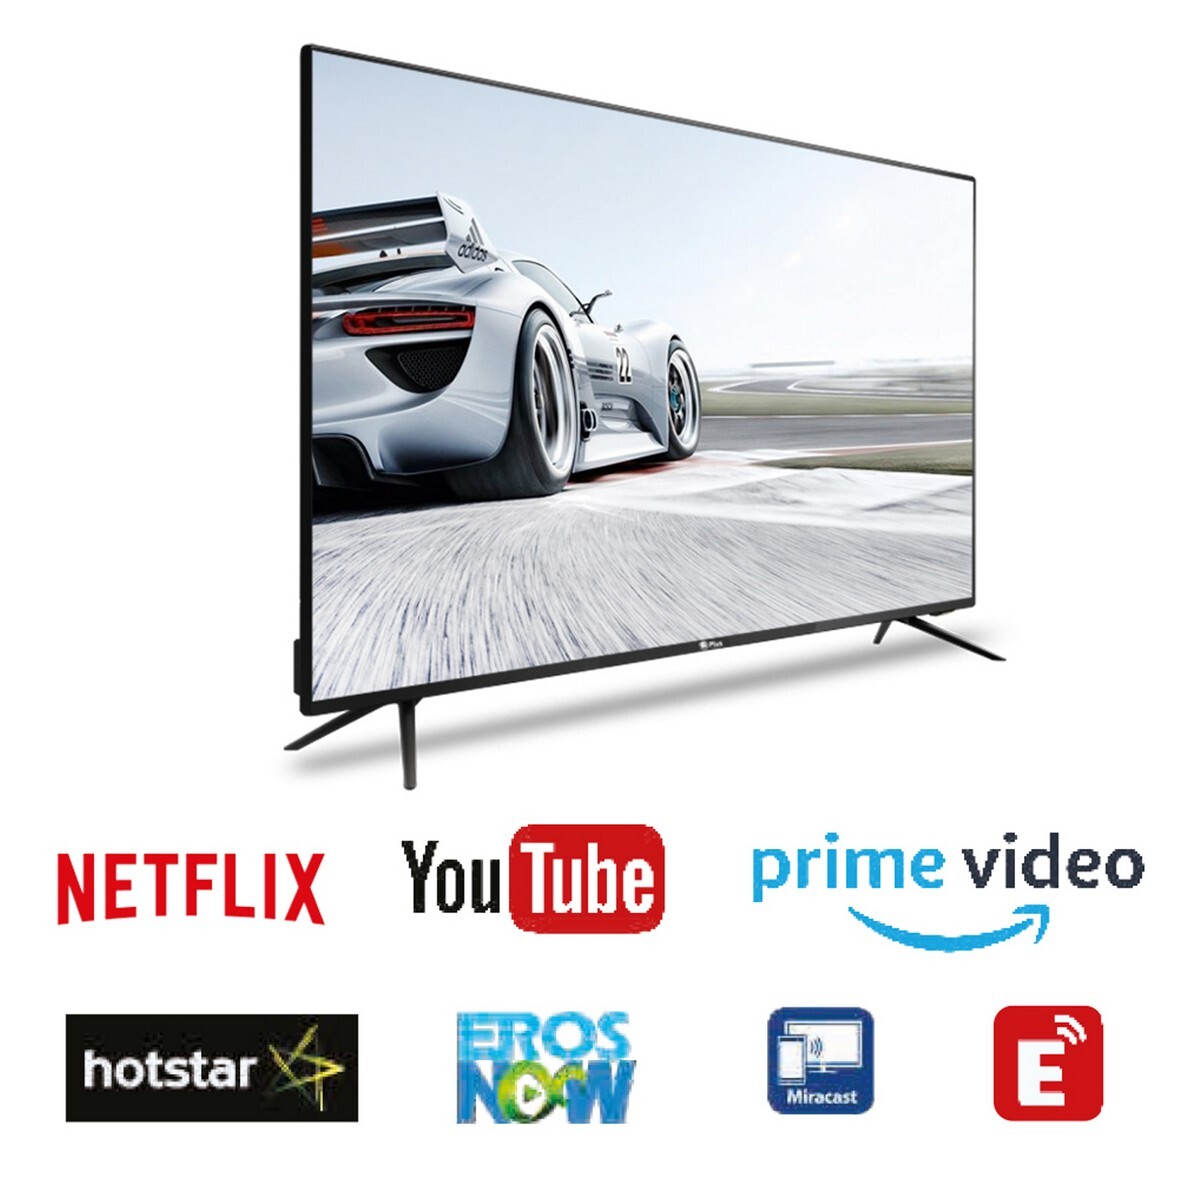 Mr Plus HD Ready Android Smart LED TV Scarlet 40"